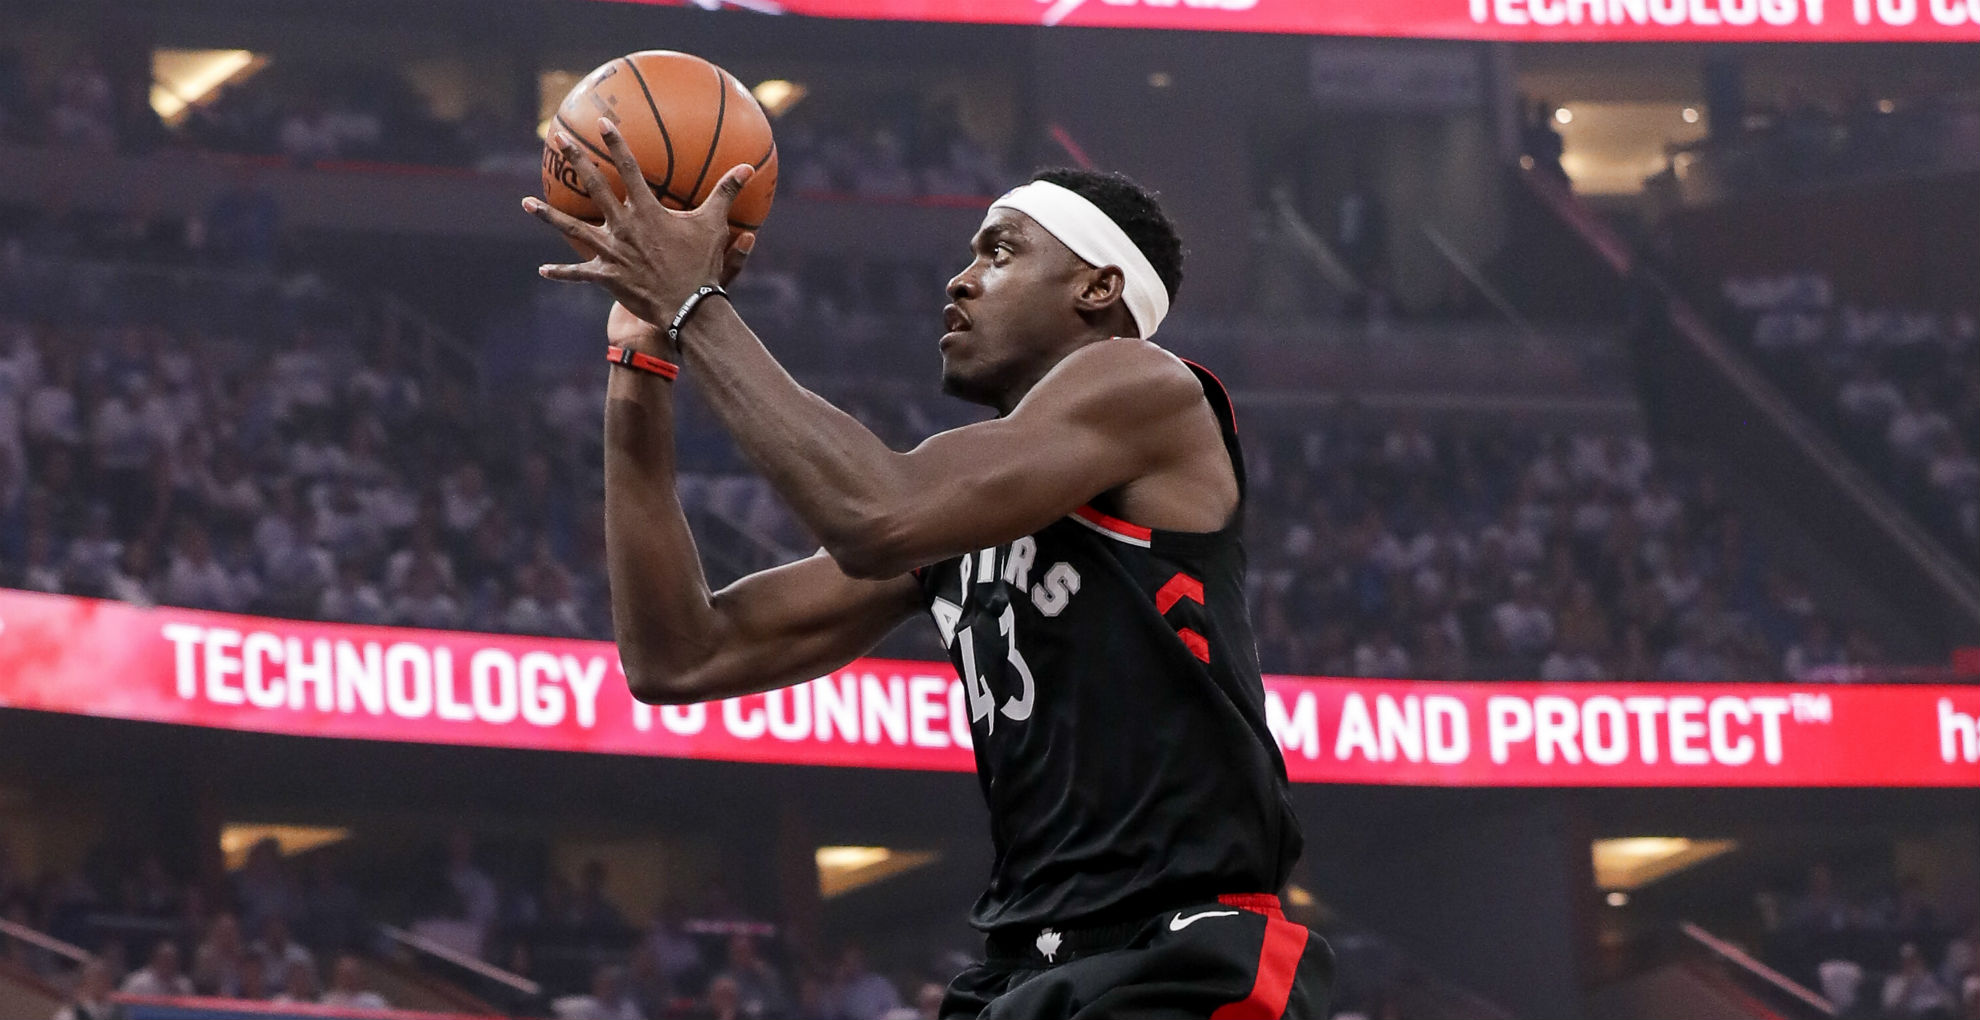 Pascal Siakam led the Toronto Raptors to victory against the Orlando Magic in the NBA.